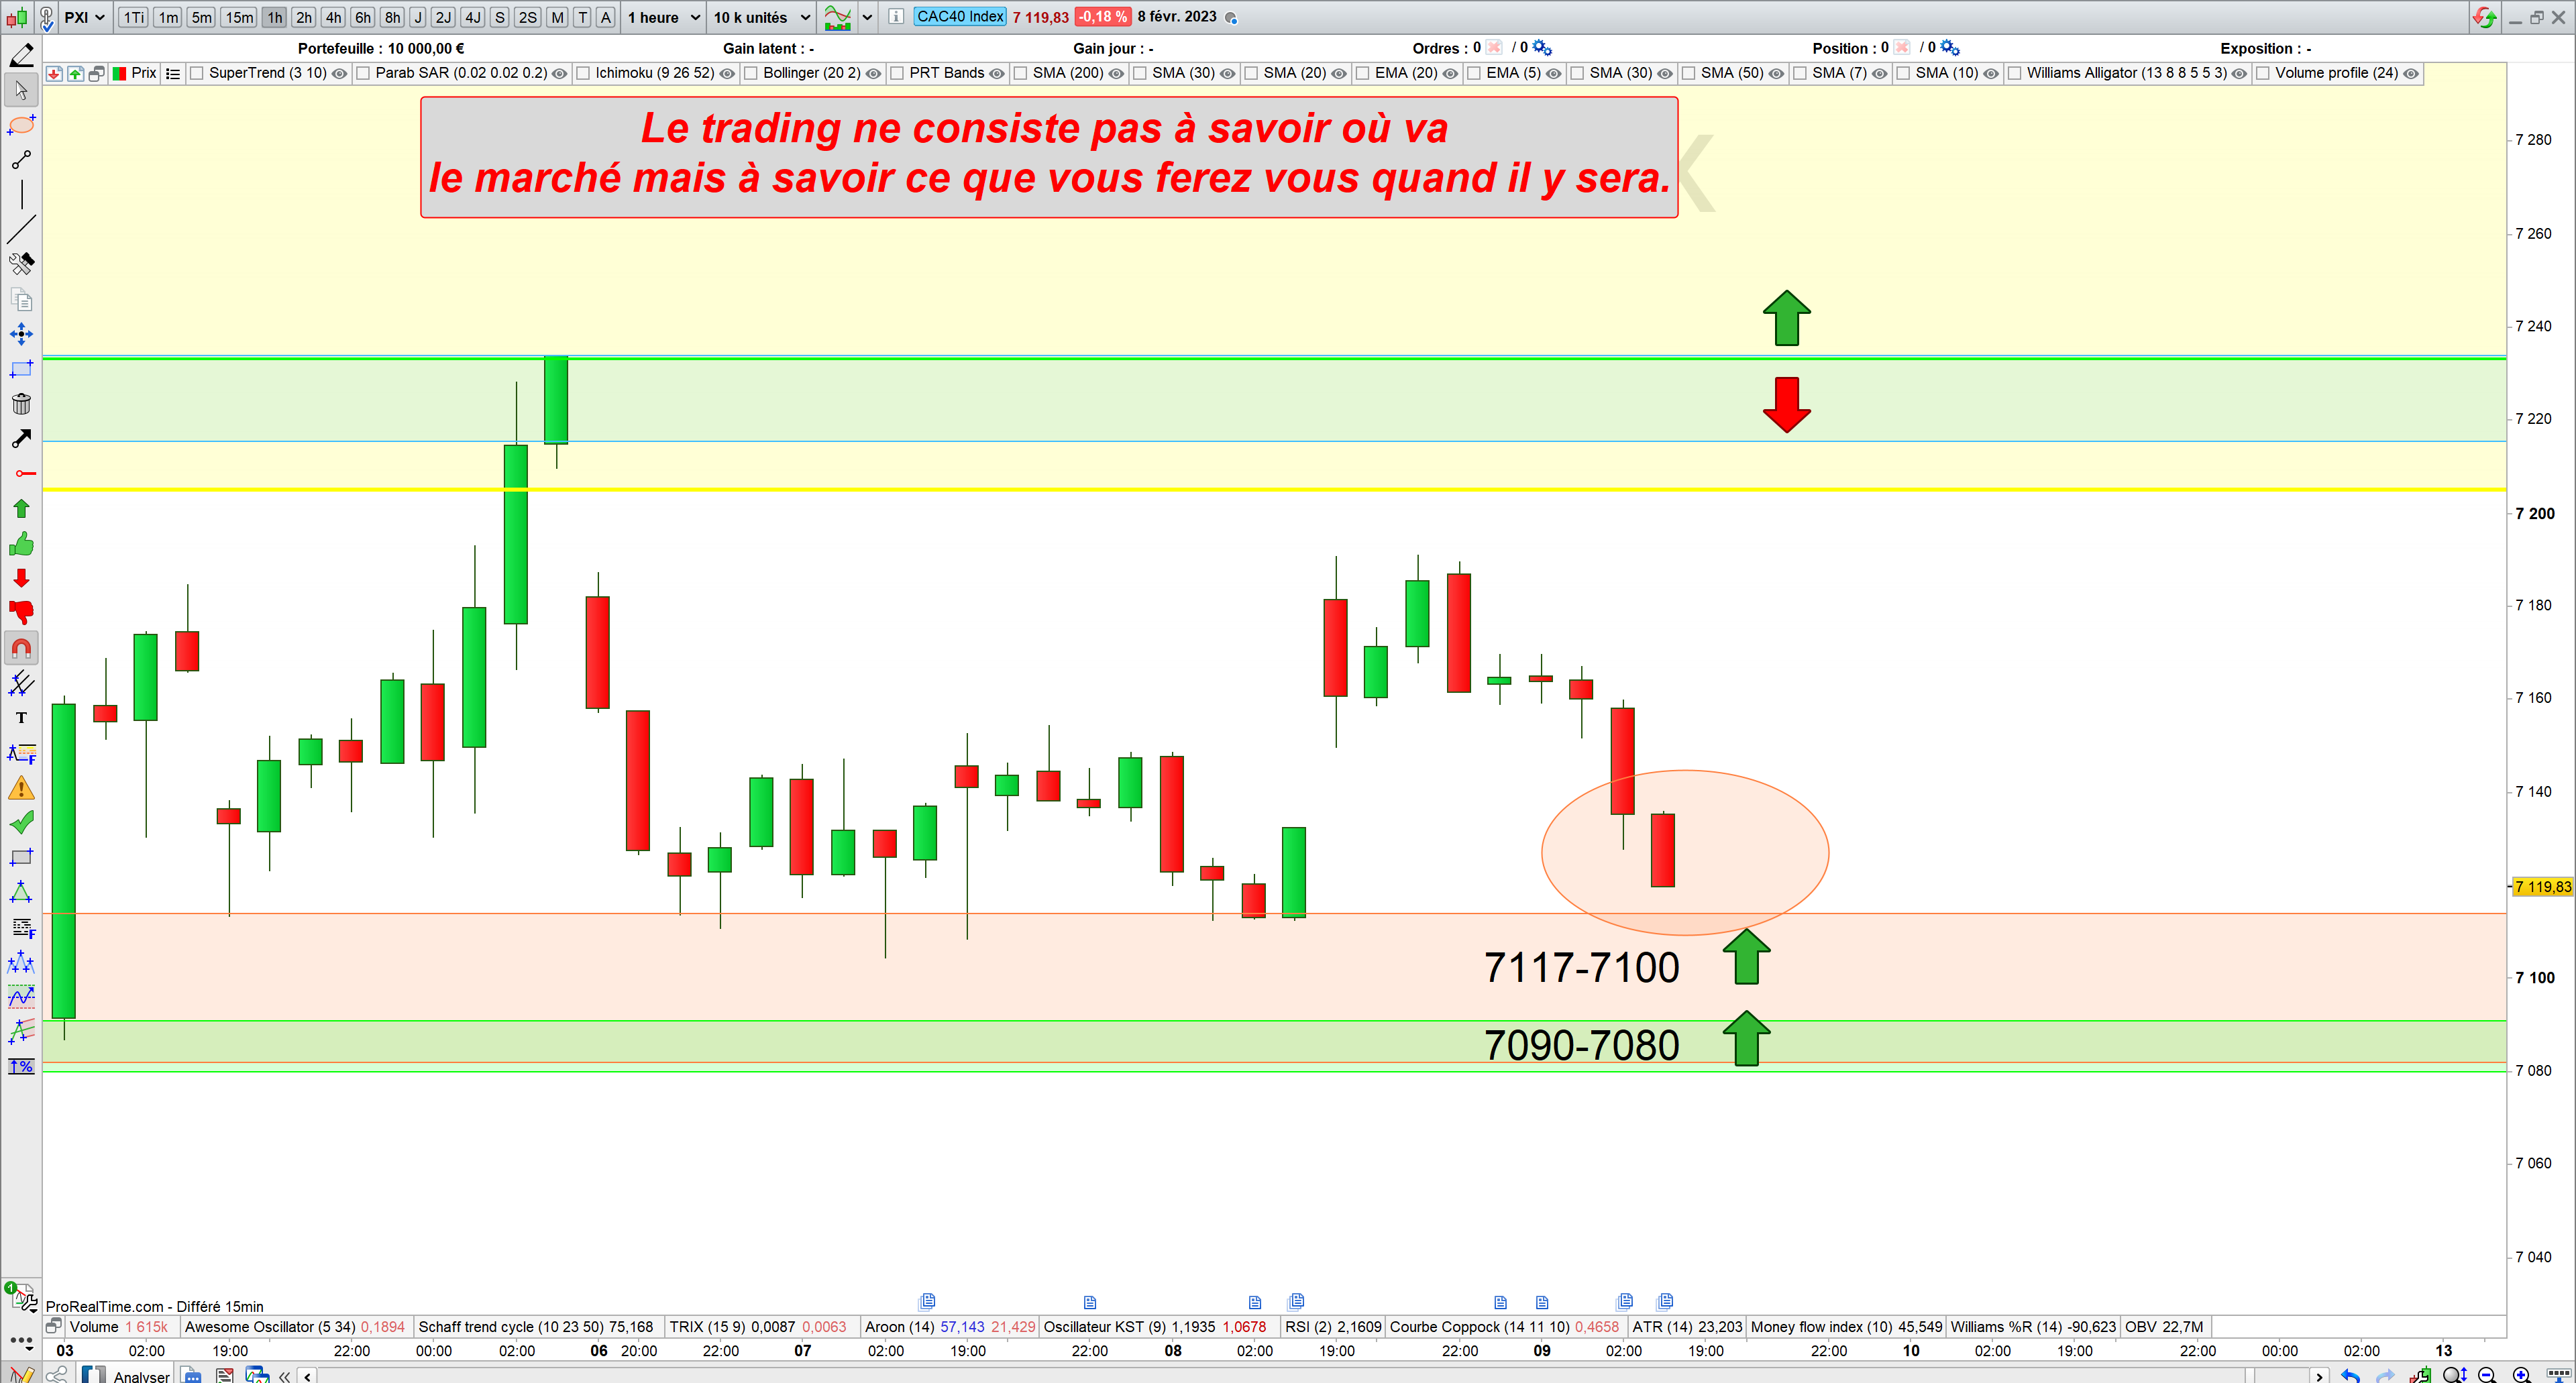 Trading cac40 09/02/23